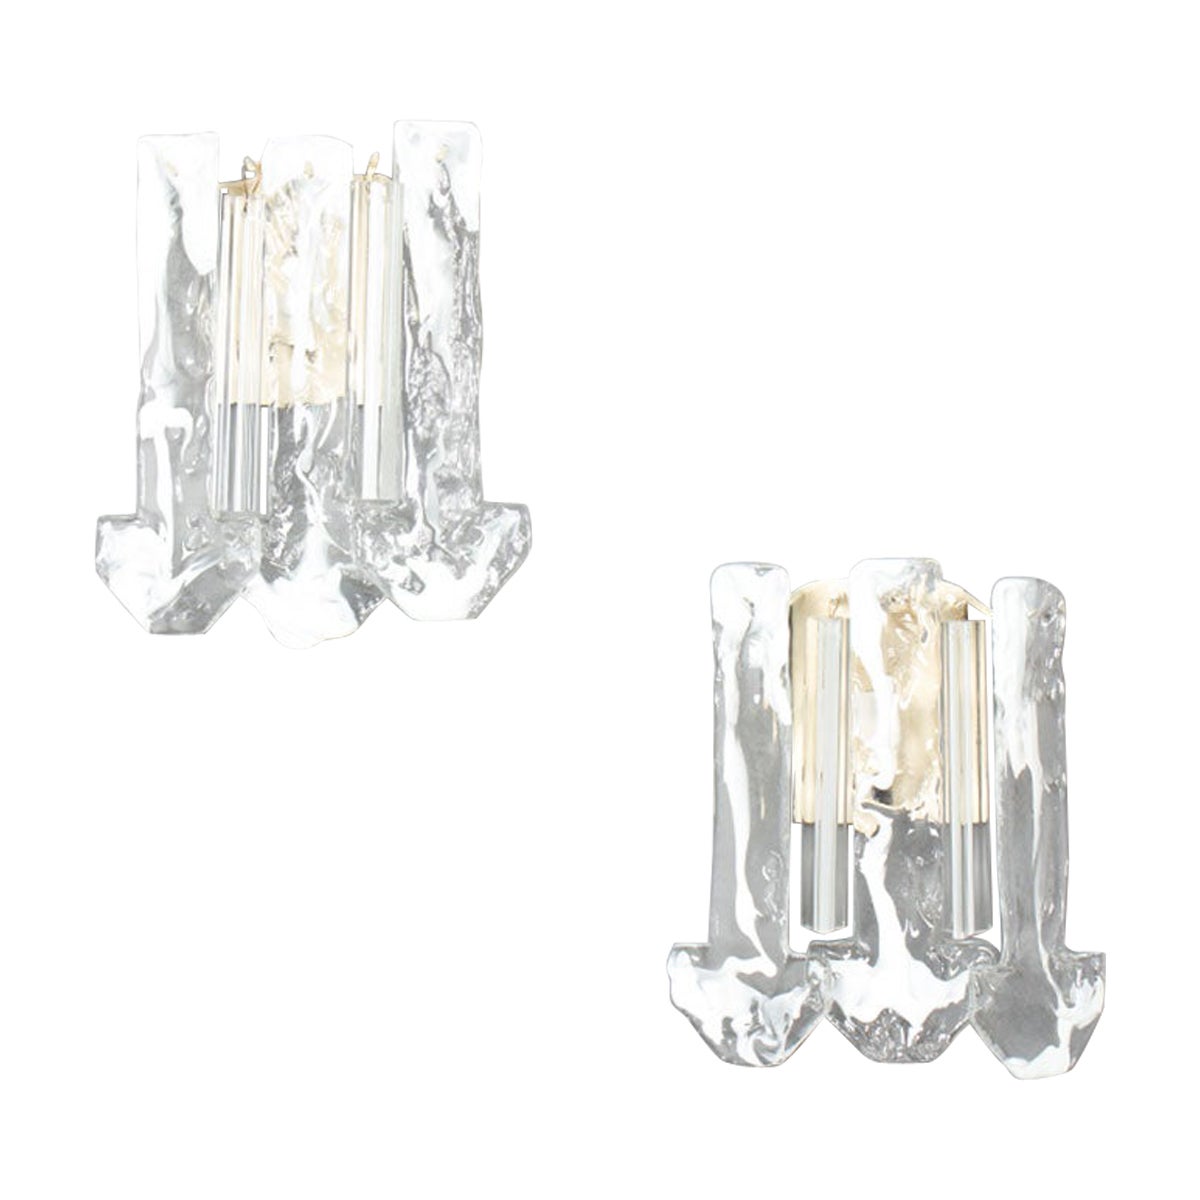 Set of 2 wall lights in Murano glass 1960